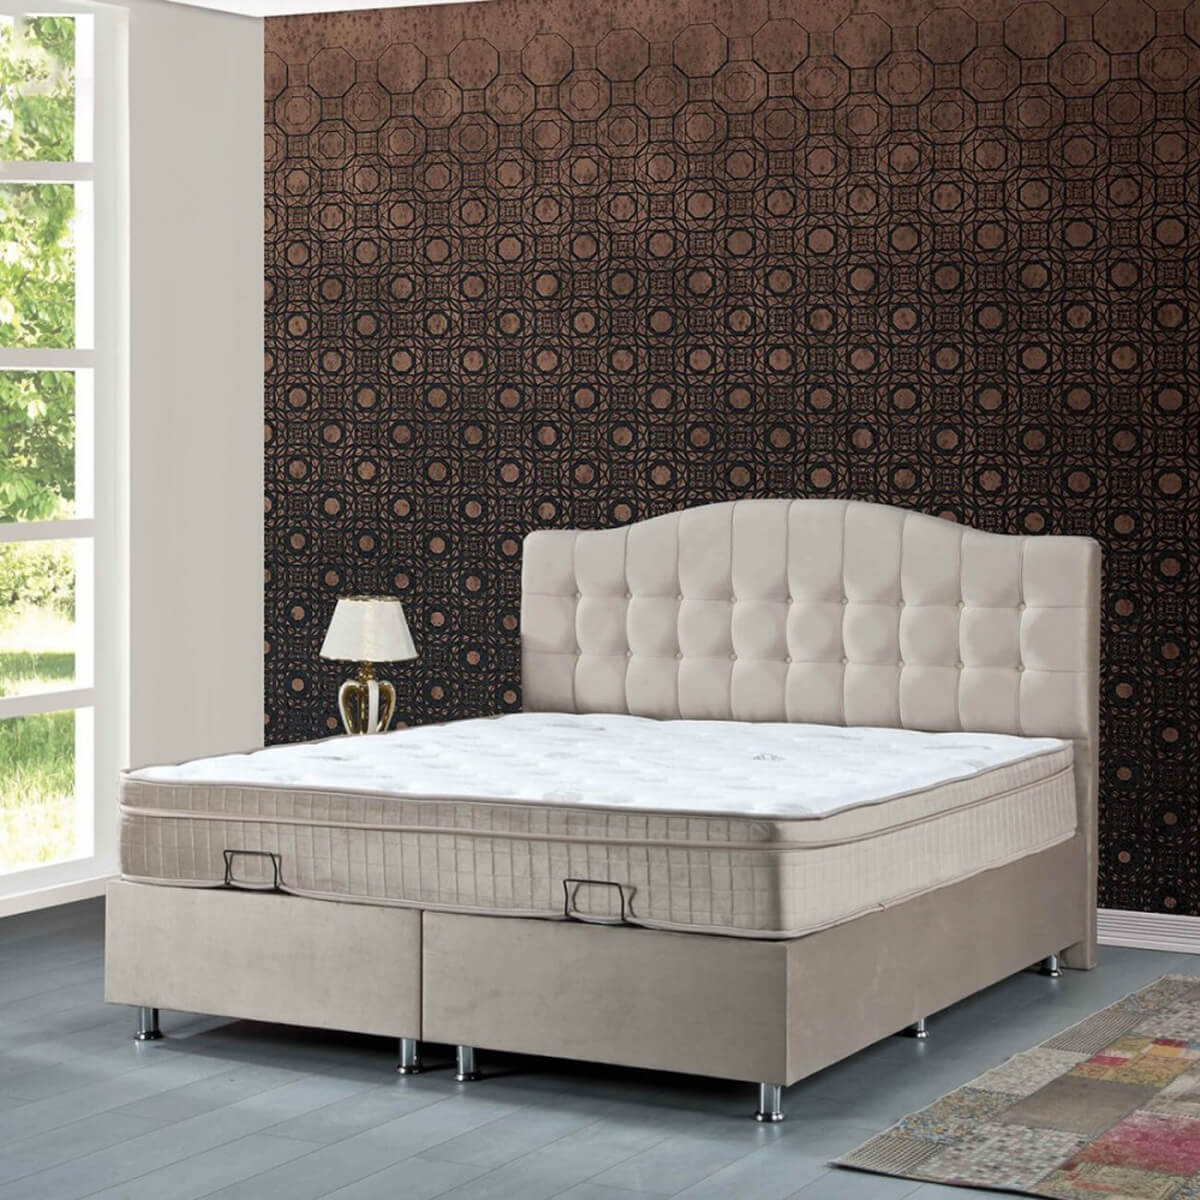 Boxspring 160x200 ✓ Tot korting ✓ Grootste collectie